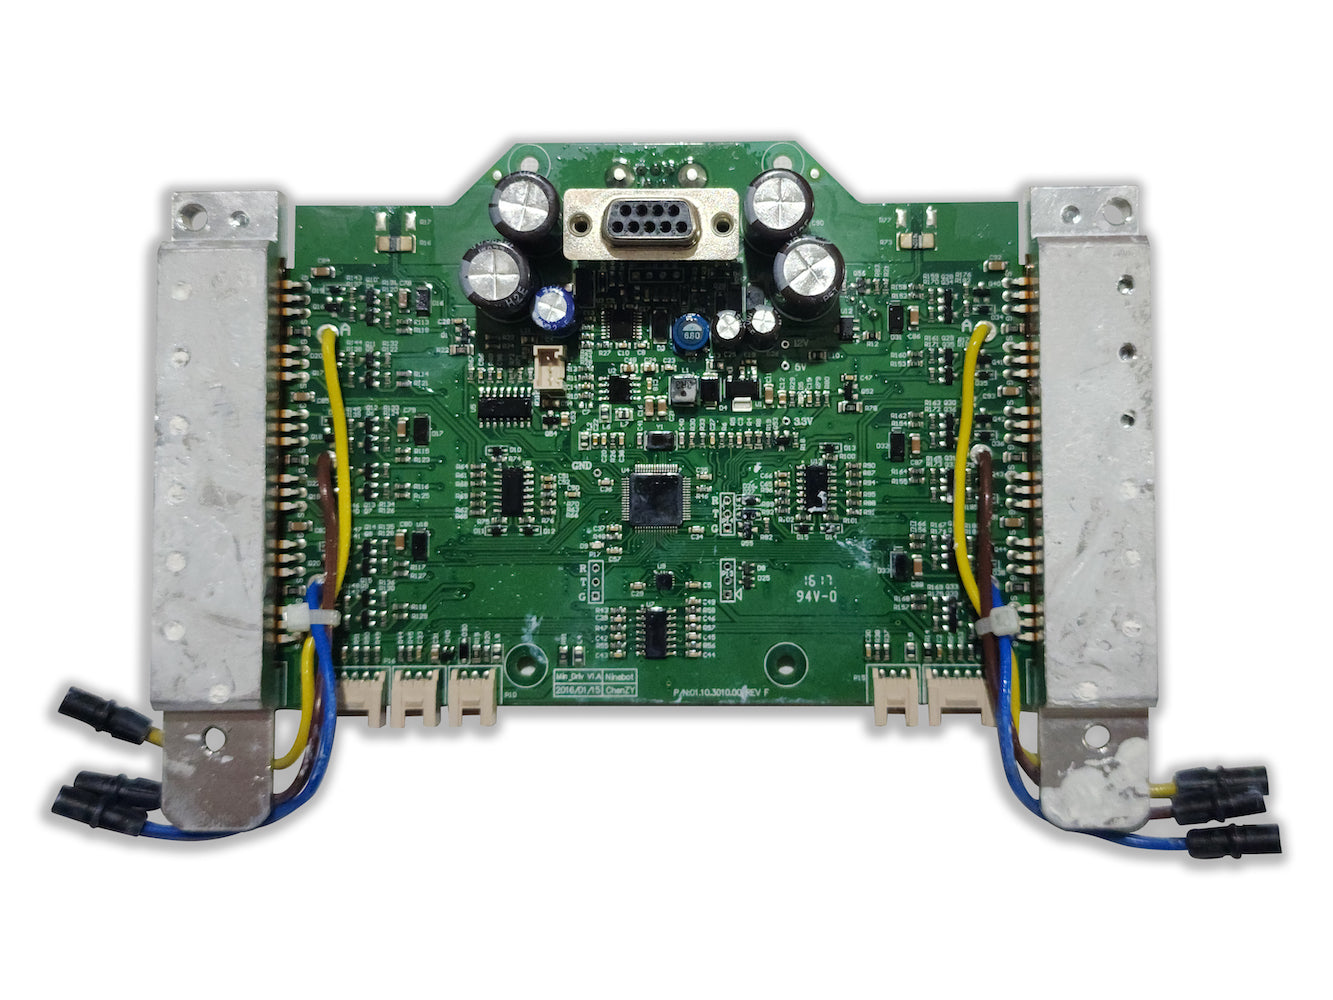 Original Control Board for Segway miniPRO and Ninebot S